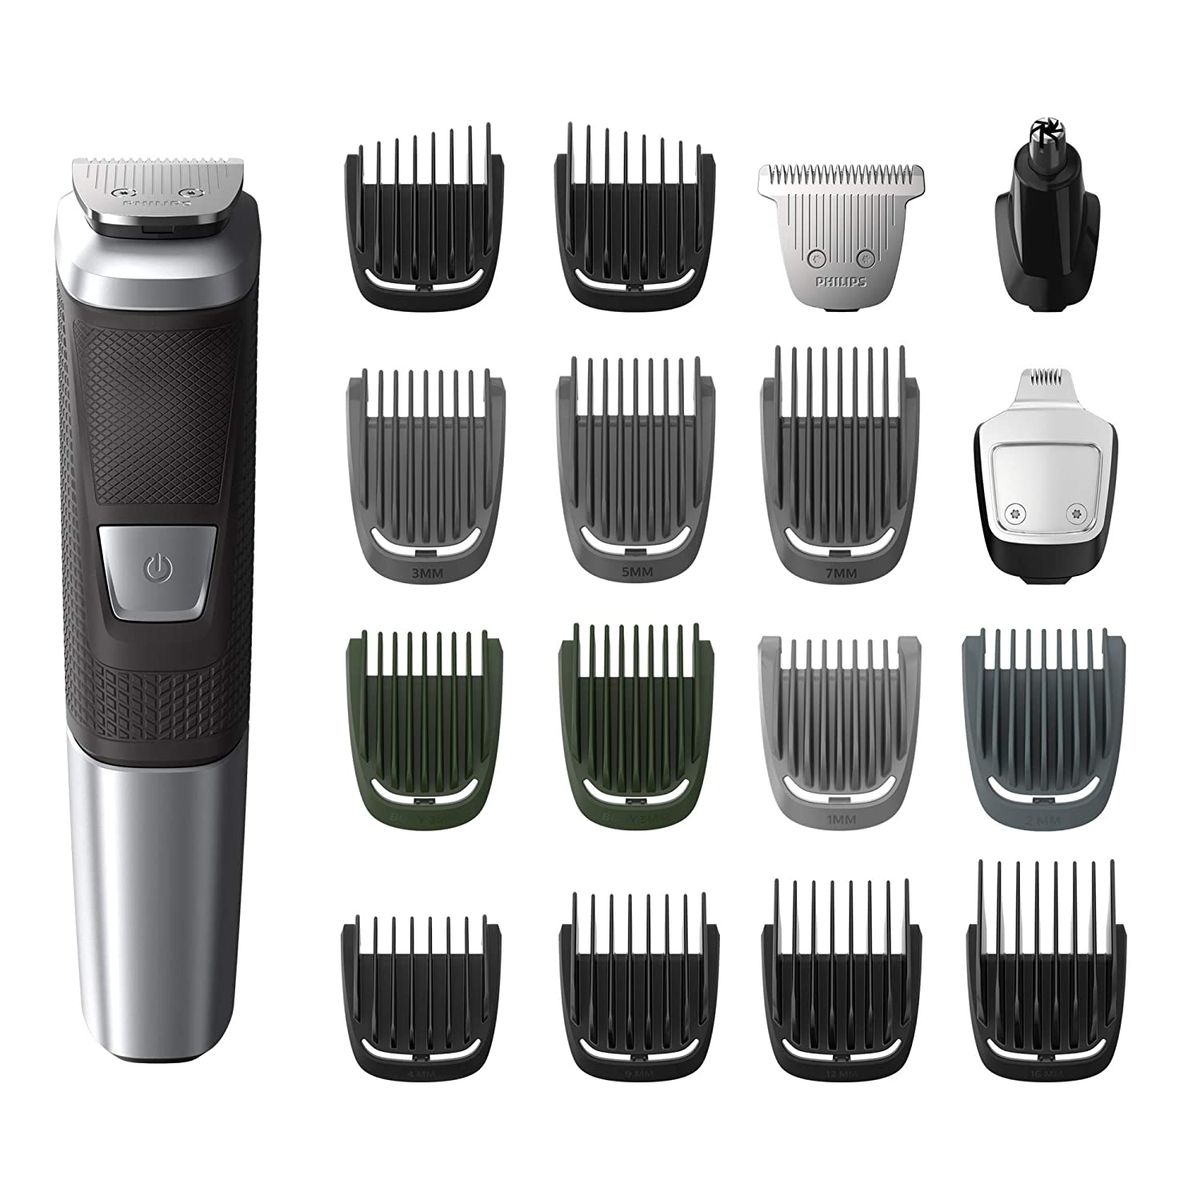 wahl hair clippers in stock near me